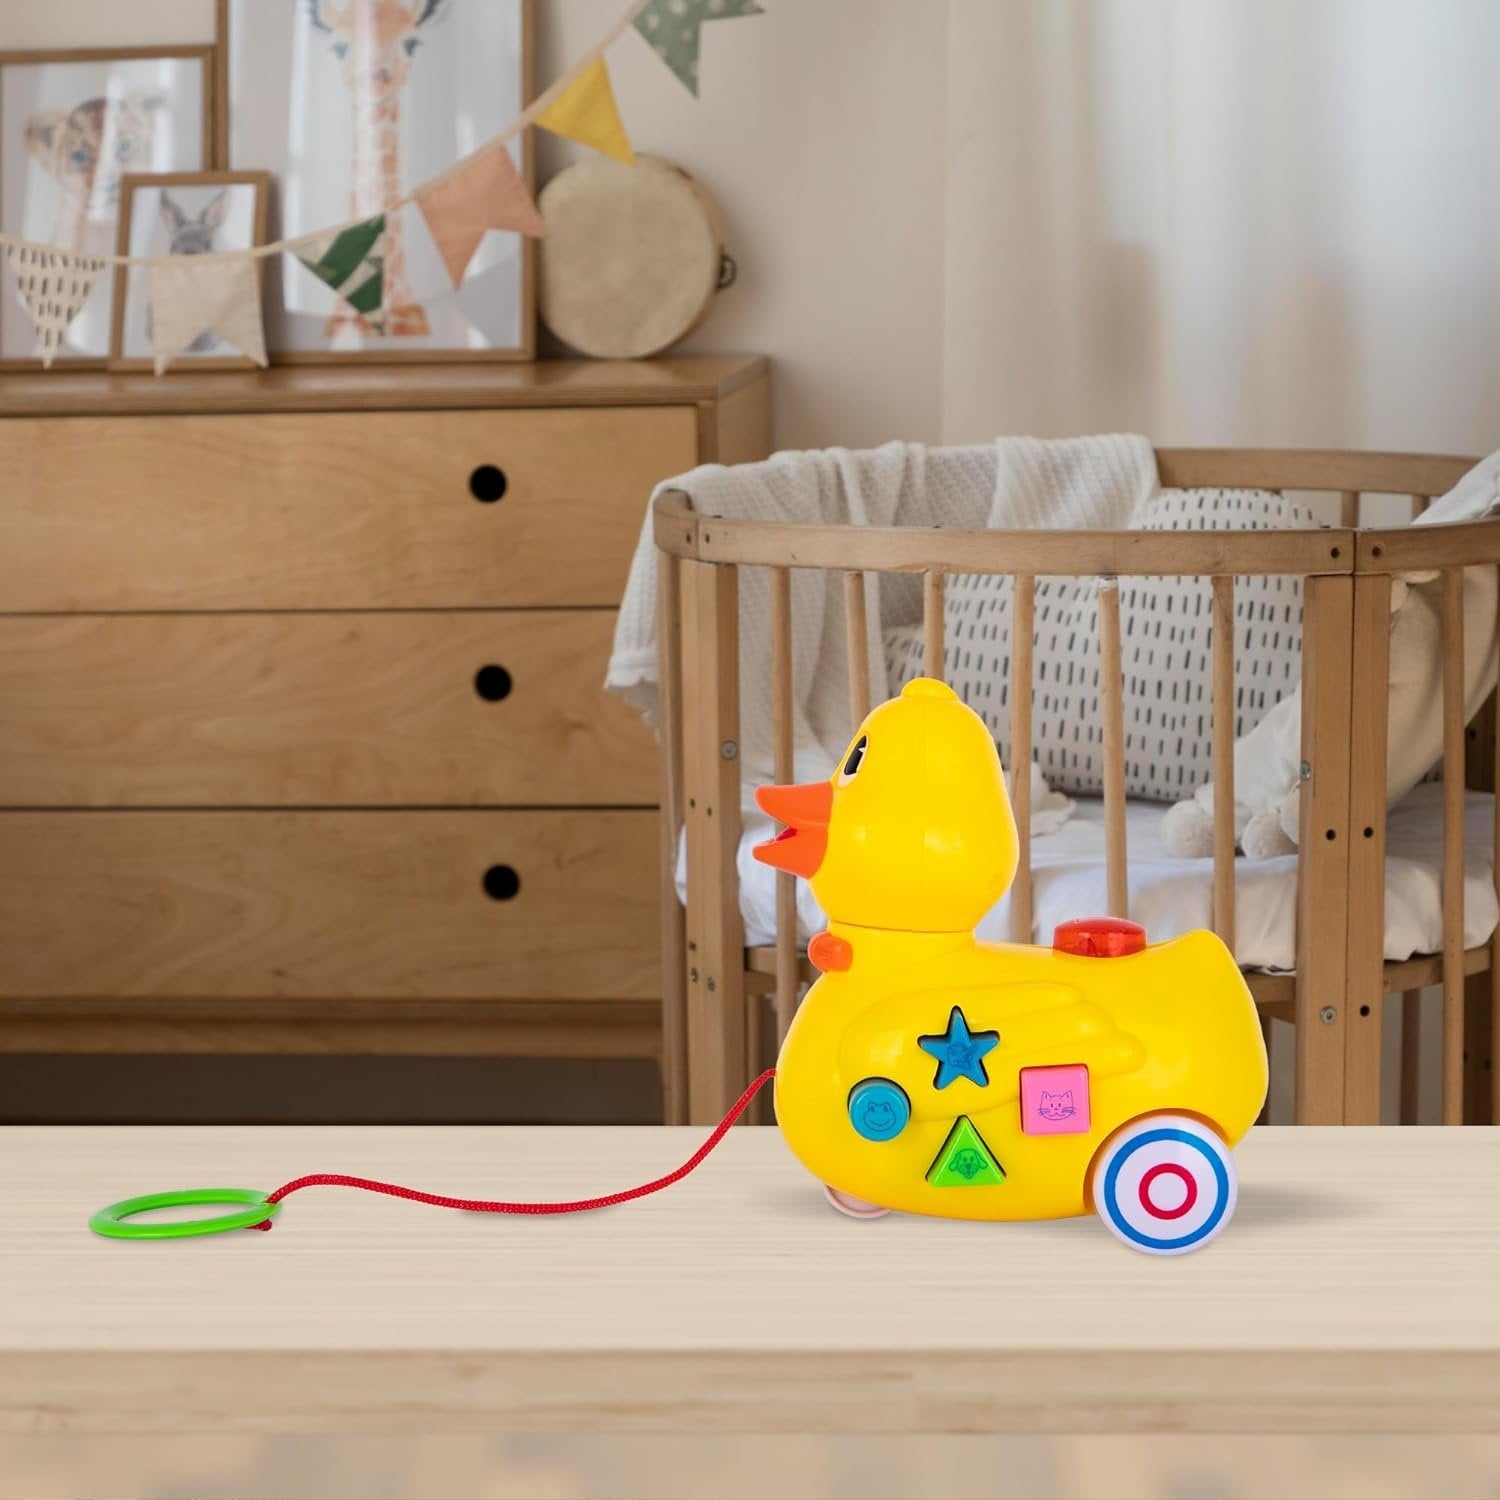 Musical Walking Duck Pull Toy - Yellow Duck Toy for Kids - Toddler Pull Toy Duck with Lights, Animal Sounds, and Music - Helps Teach Colors, Sounds, and Shapes - Gift for Kids 3 and Up